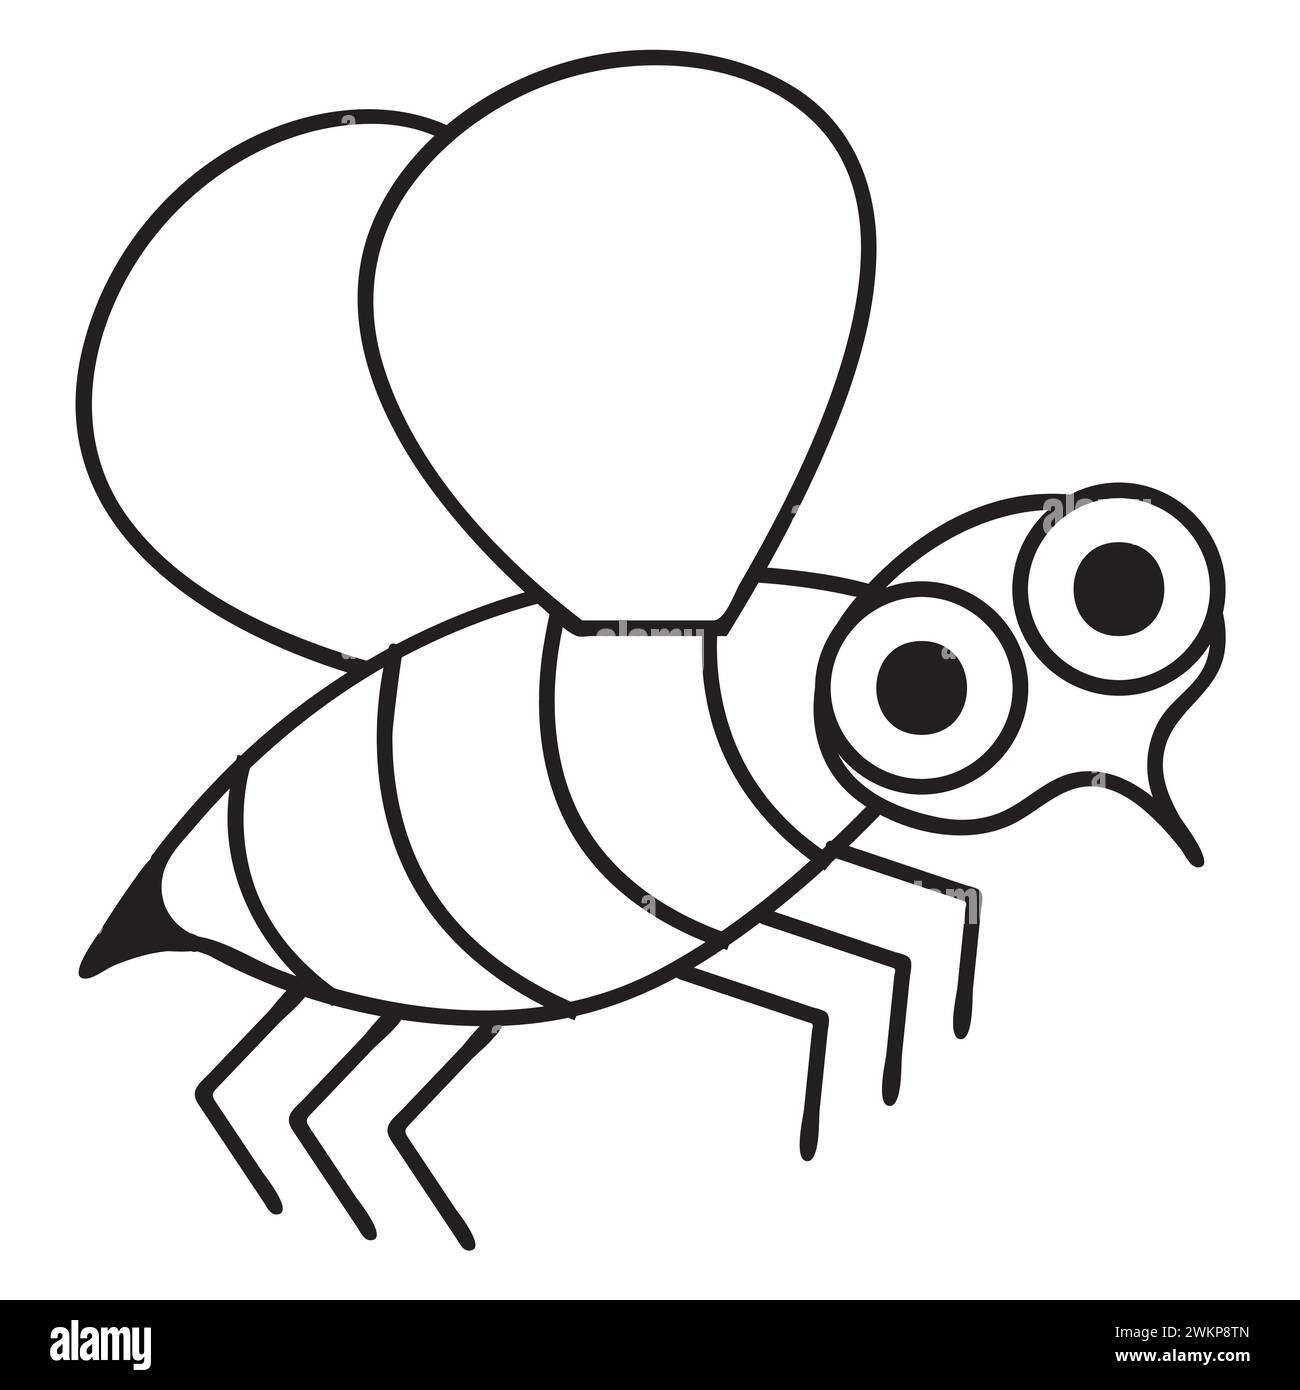 Cute bee in doodle style. Vector illustration isolated on white background. Stock Vector